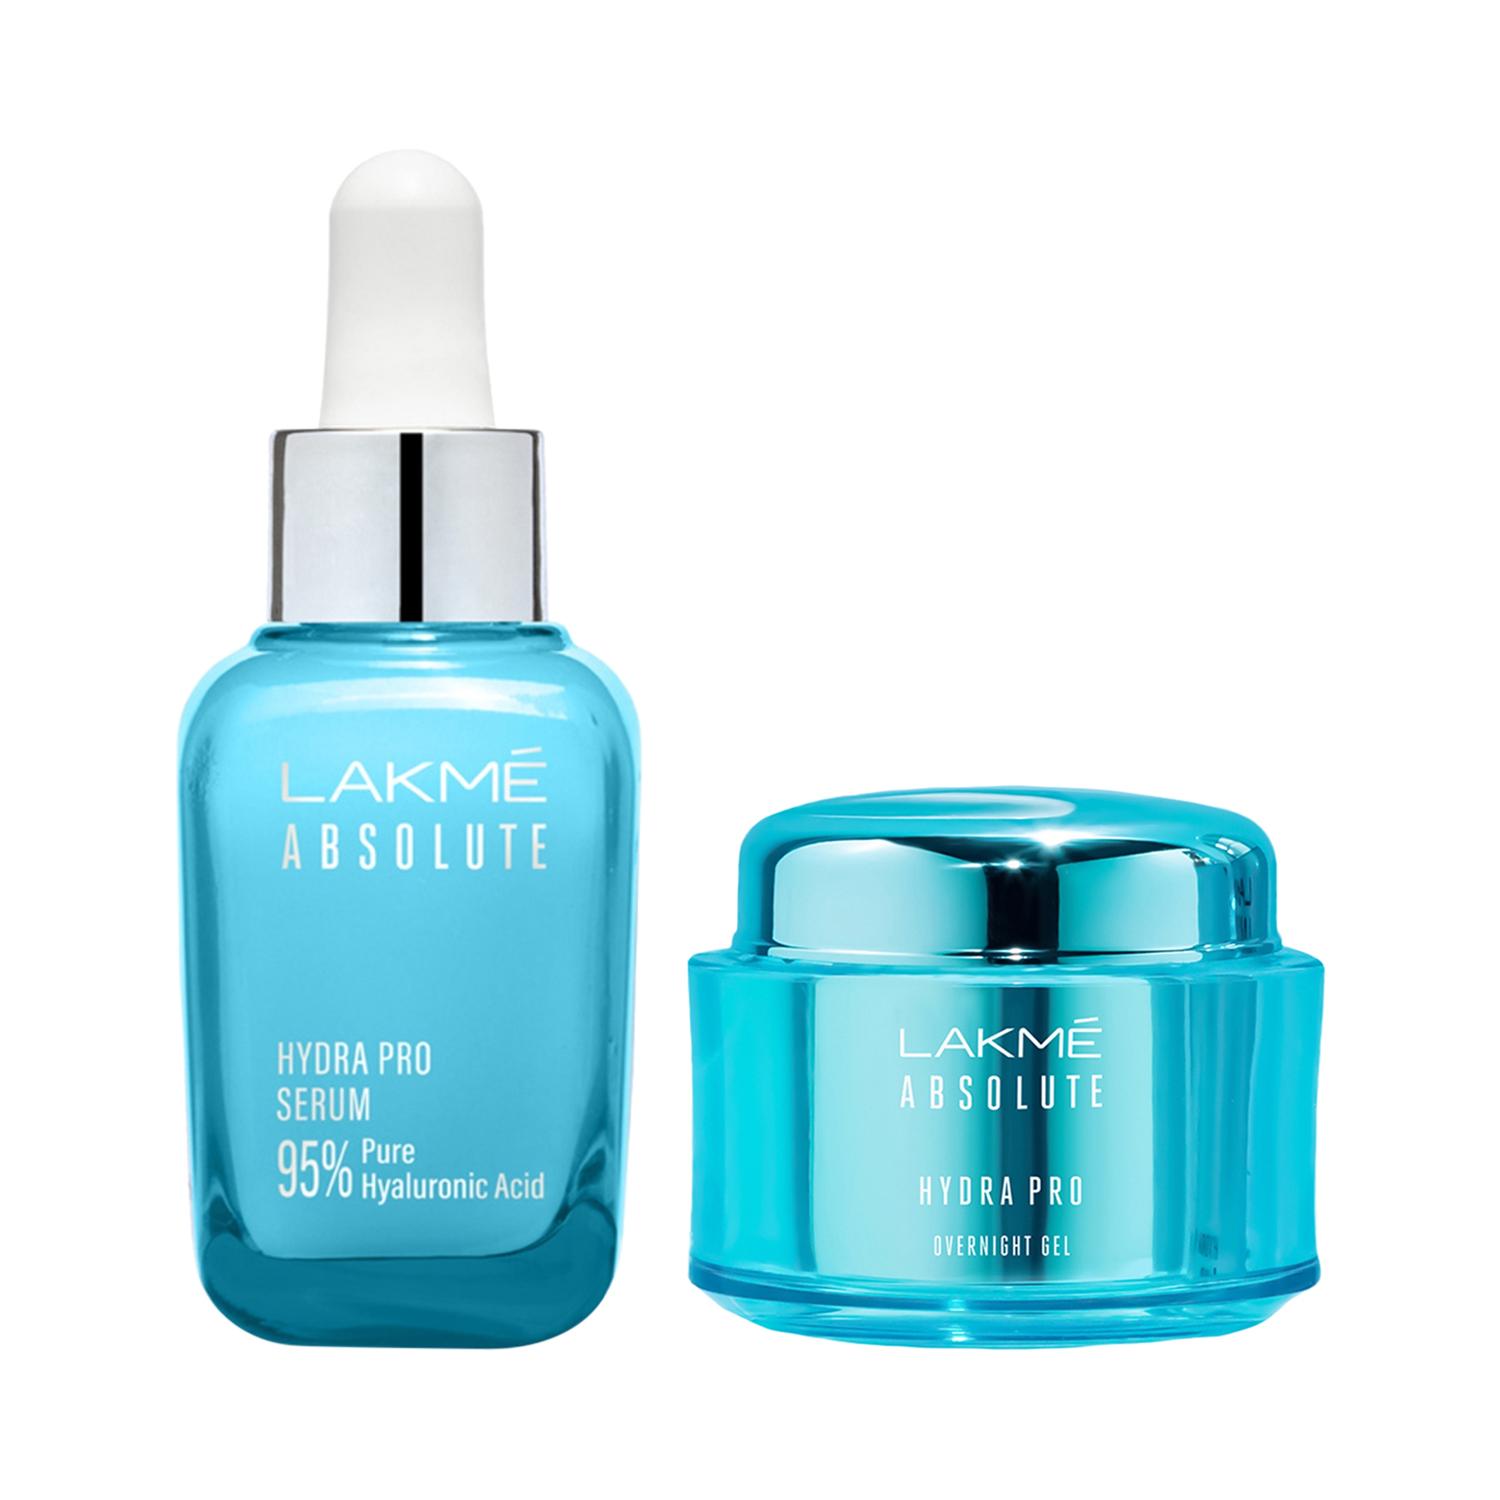 Lakme | Lakme Daily Dewy Duo PM Combo